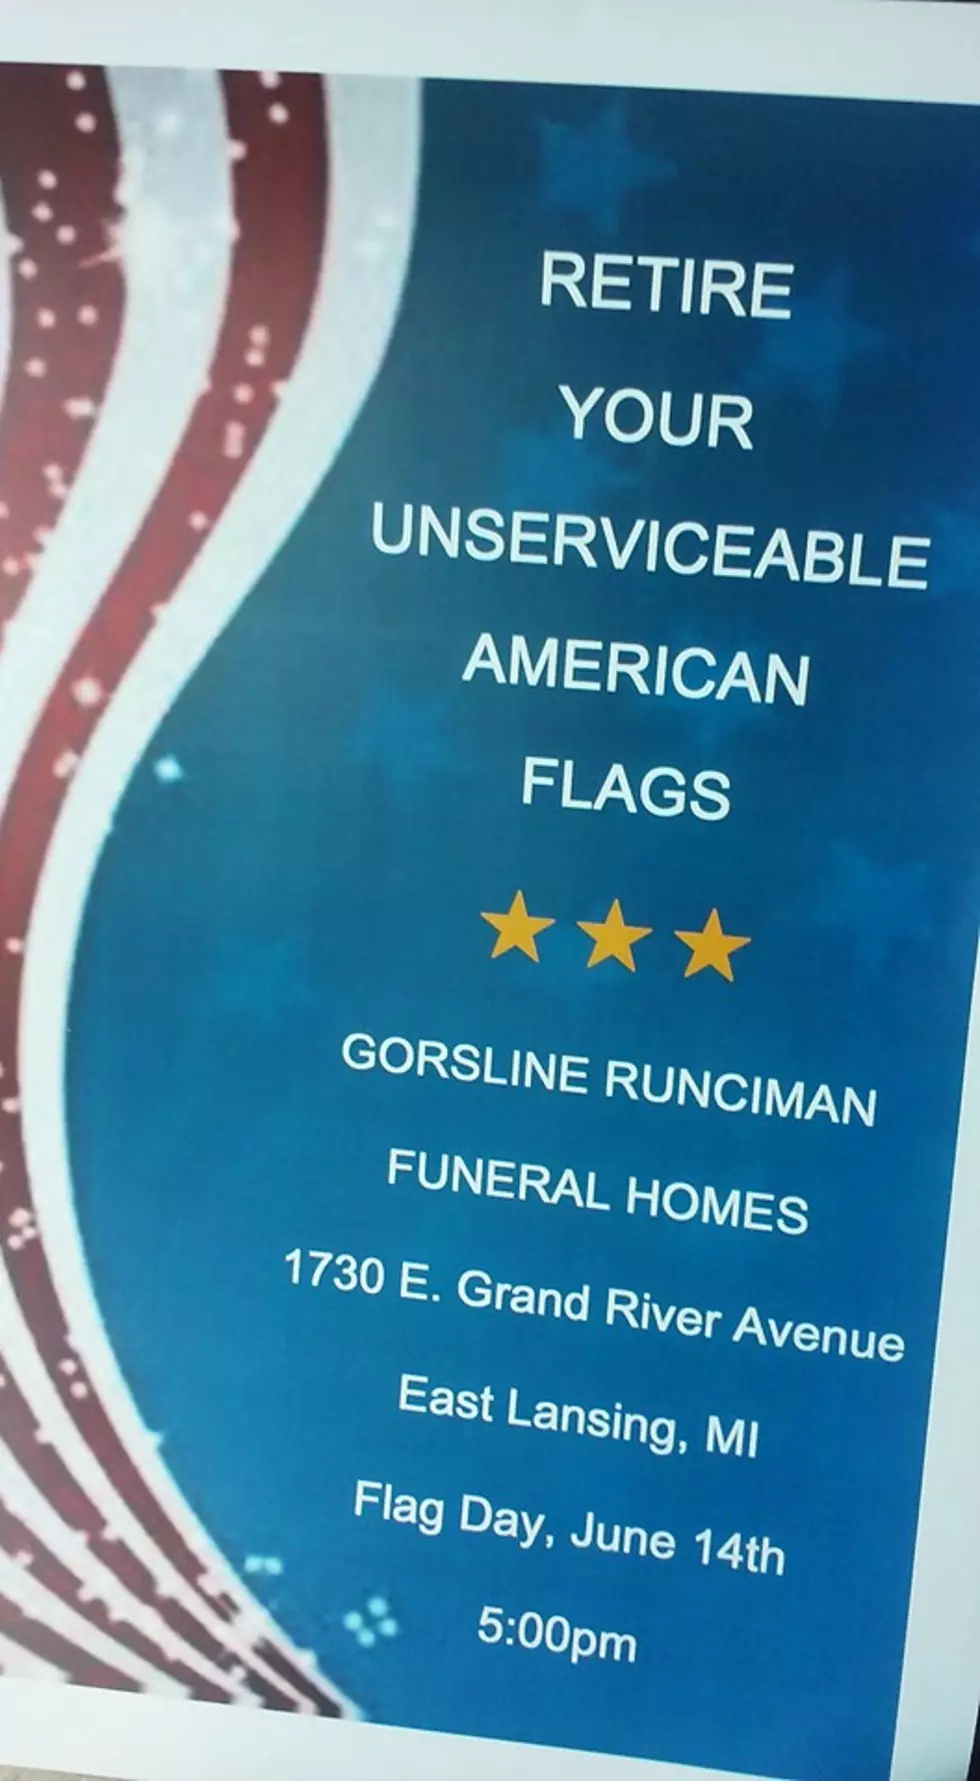 If Your American Flag is in Tatters, You Can Honorably Retire It Locally